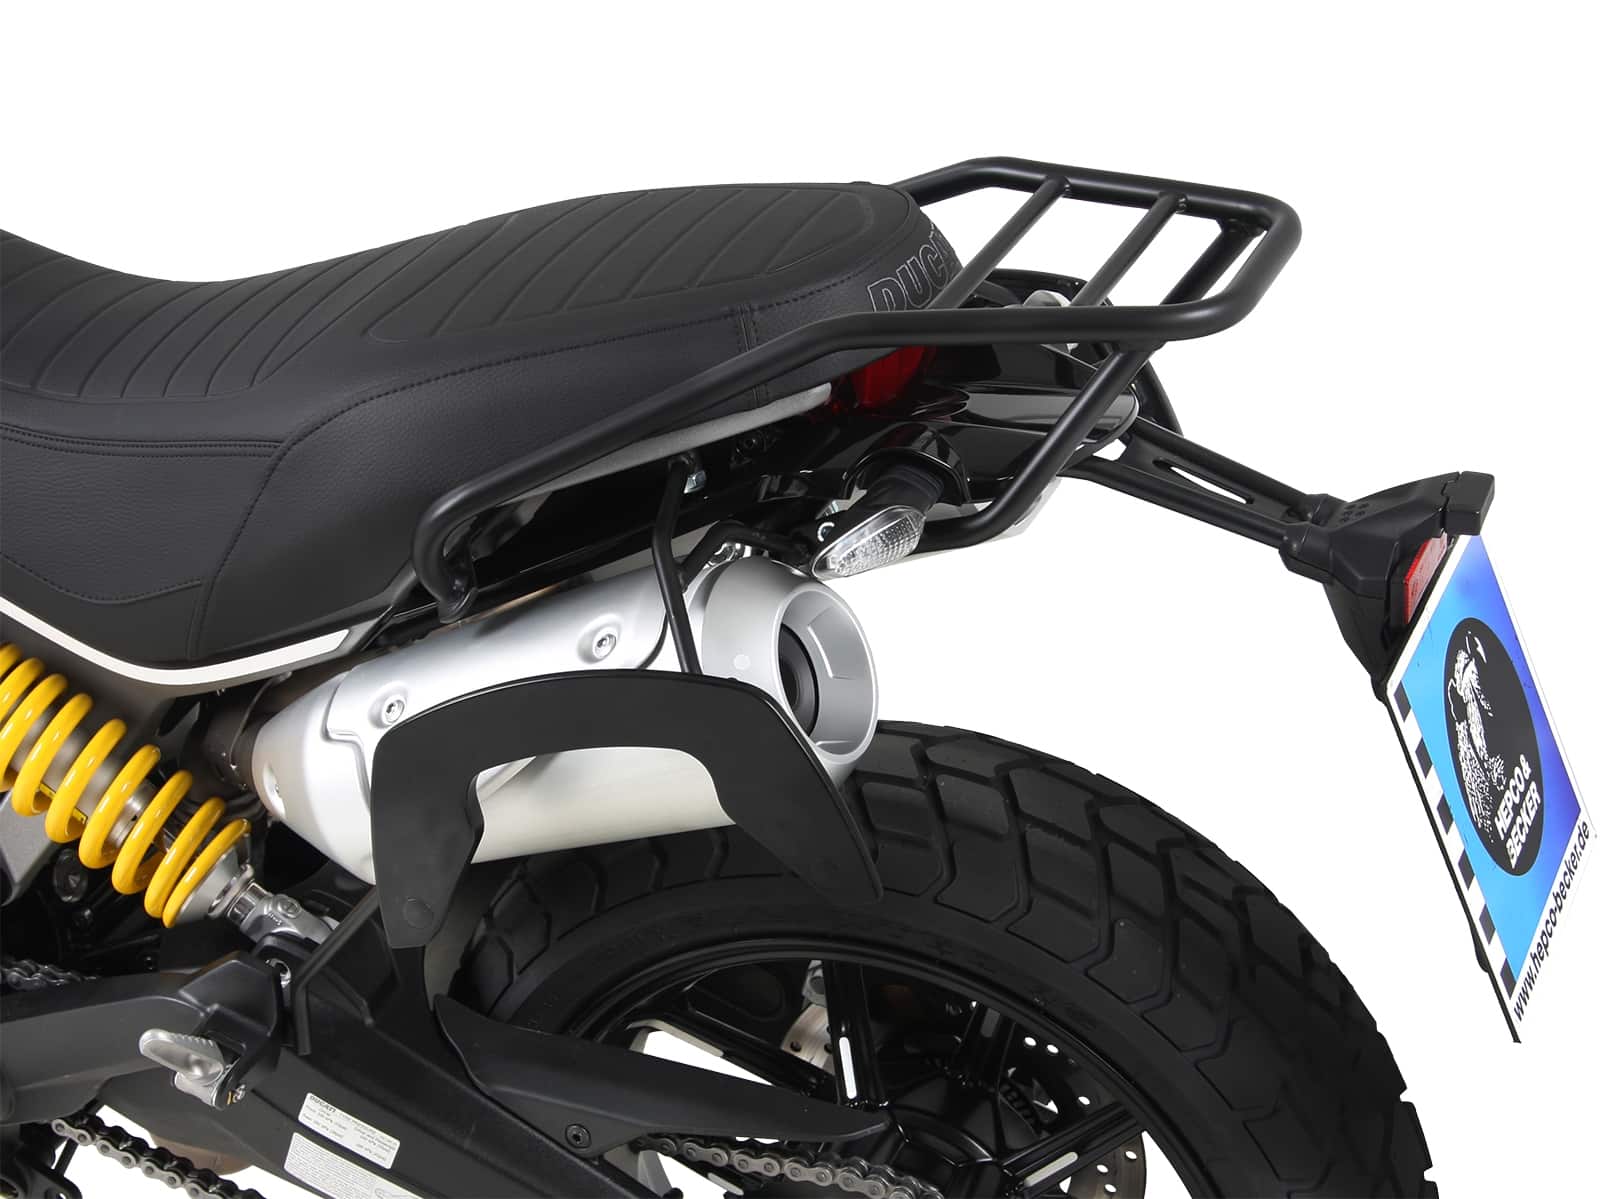 C-Bow sidecarrier for Ducati Scrambler1100/Special/Sport (2018-2020)